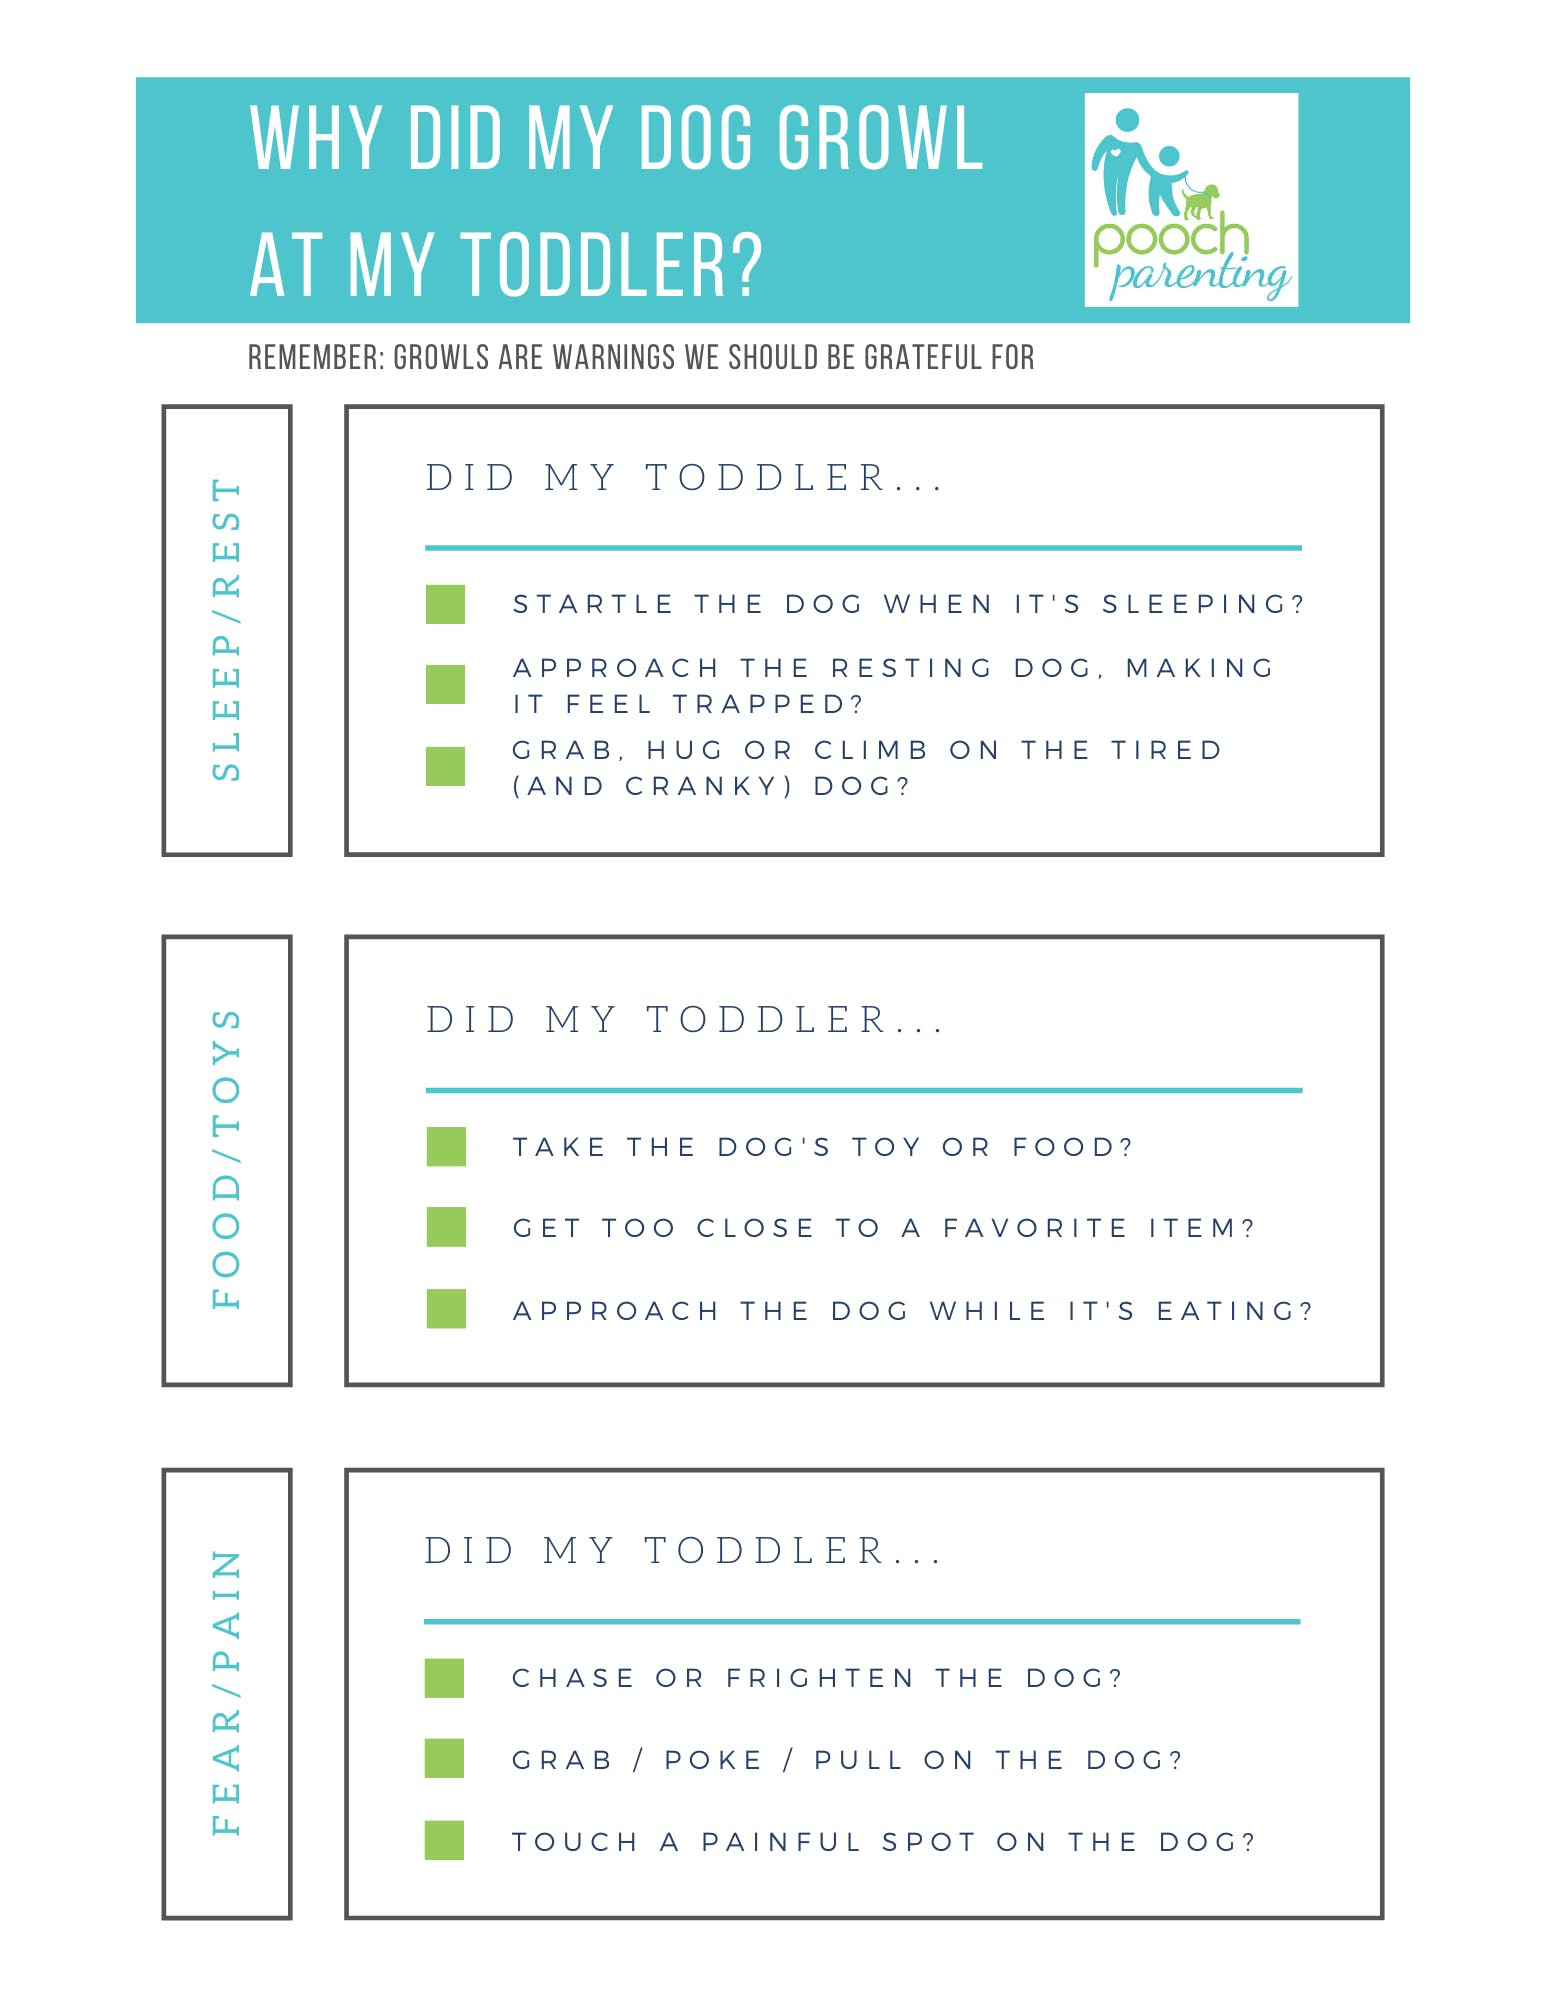 Free Printable Dog Training Worksheets why Did My Dog Growl at My toddler Pooch Parenting